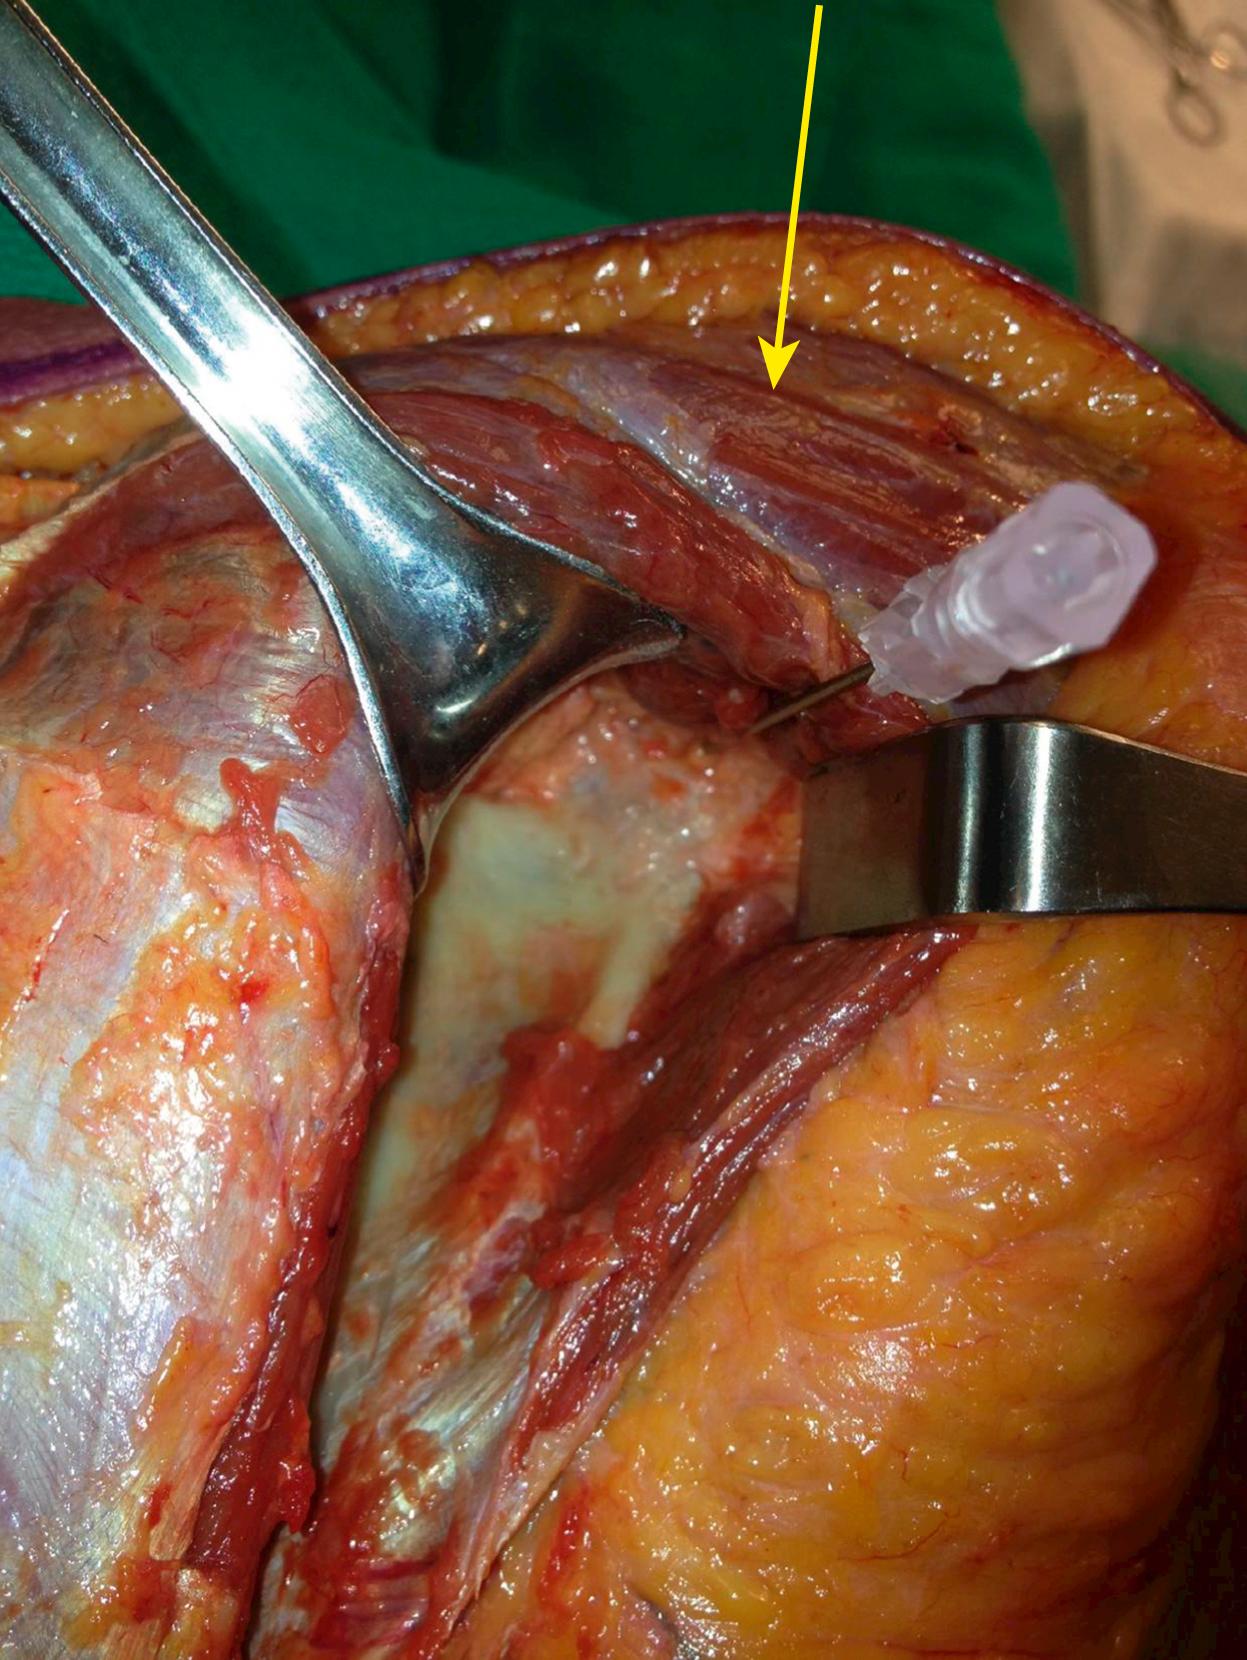 Fig. 16.6, This posterior shoulder dissection shows the exposure to the posterior glenoid and scapular neck through a modified deltoid sparing Judet approach. The IV needle is penetrating the glenohumeral joint and the arm would be to the right side of the picture. The infraspinatus is being retracted medially to the left, and the teres minor is being retracted laterally to the right. The deltoid is intact and sweeping across the cephalad part of the surgical field (yellow arrow) .